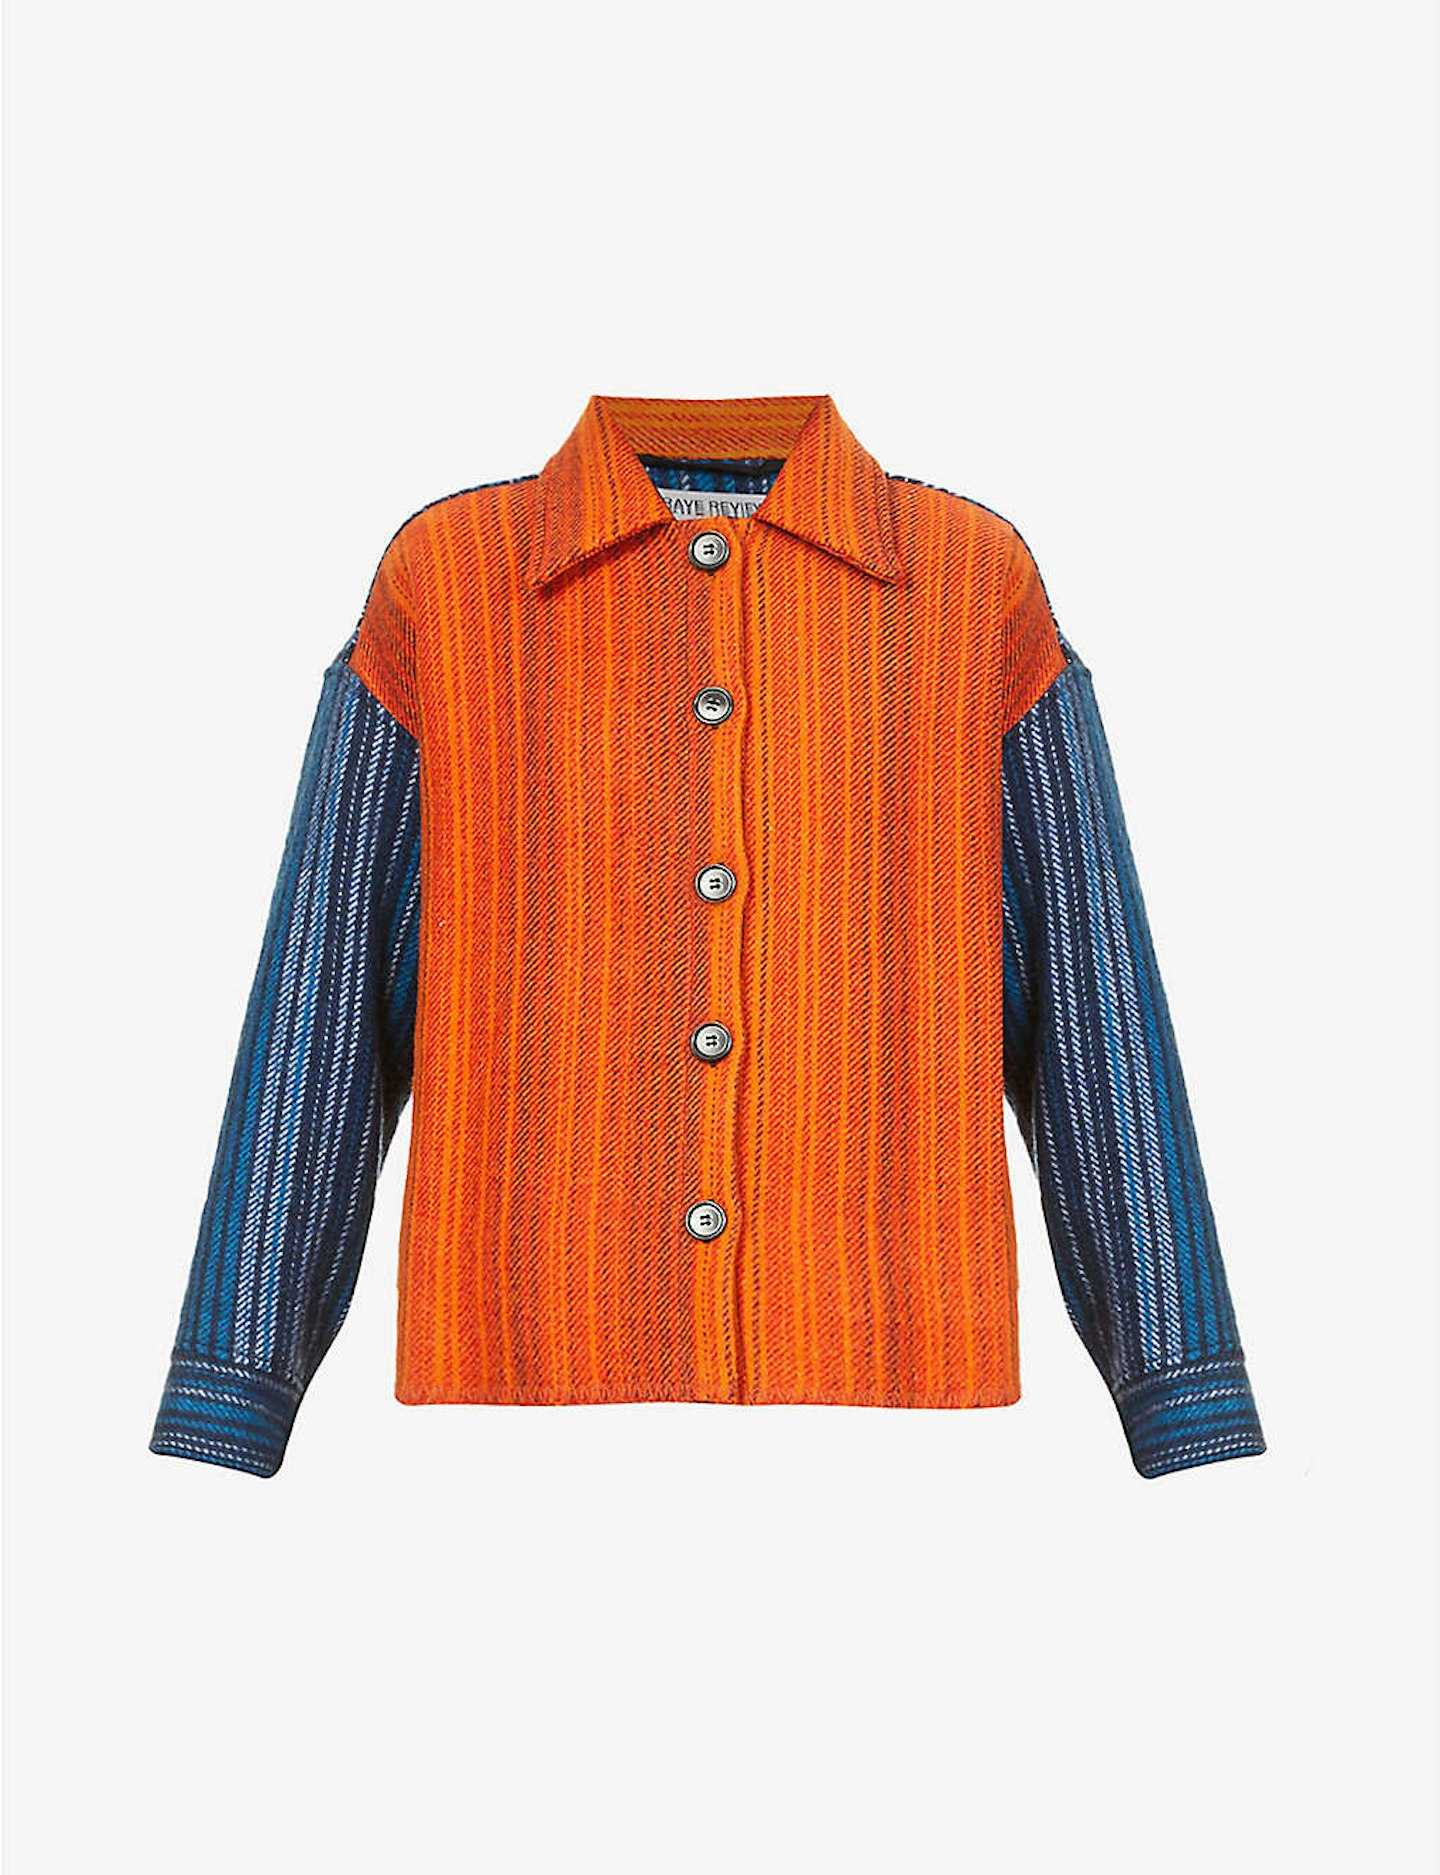 Rave Review, Striped Upcycled-Wool Jacket, £715